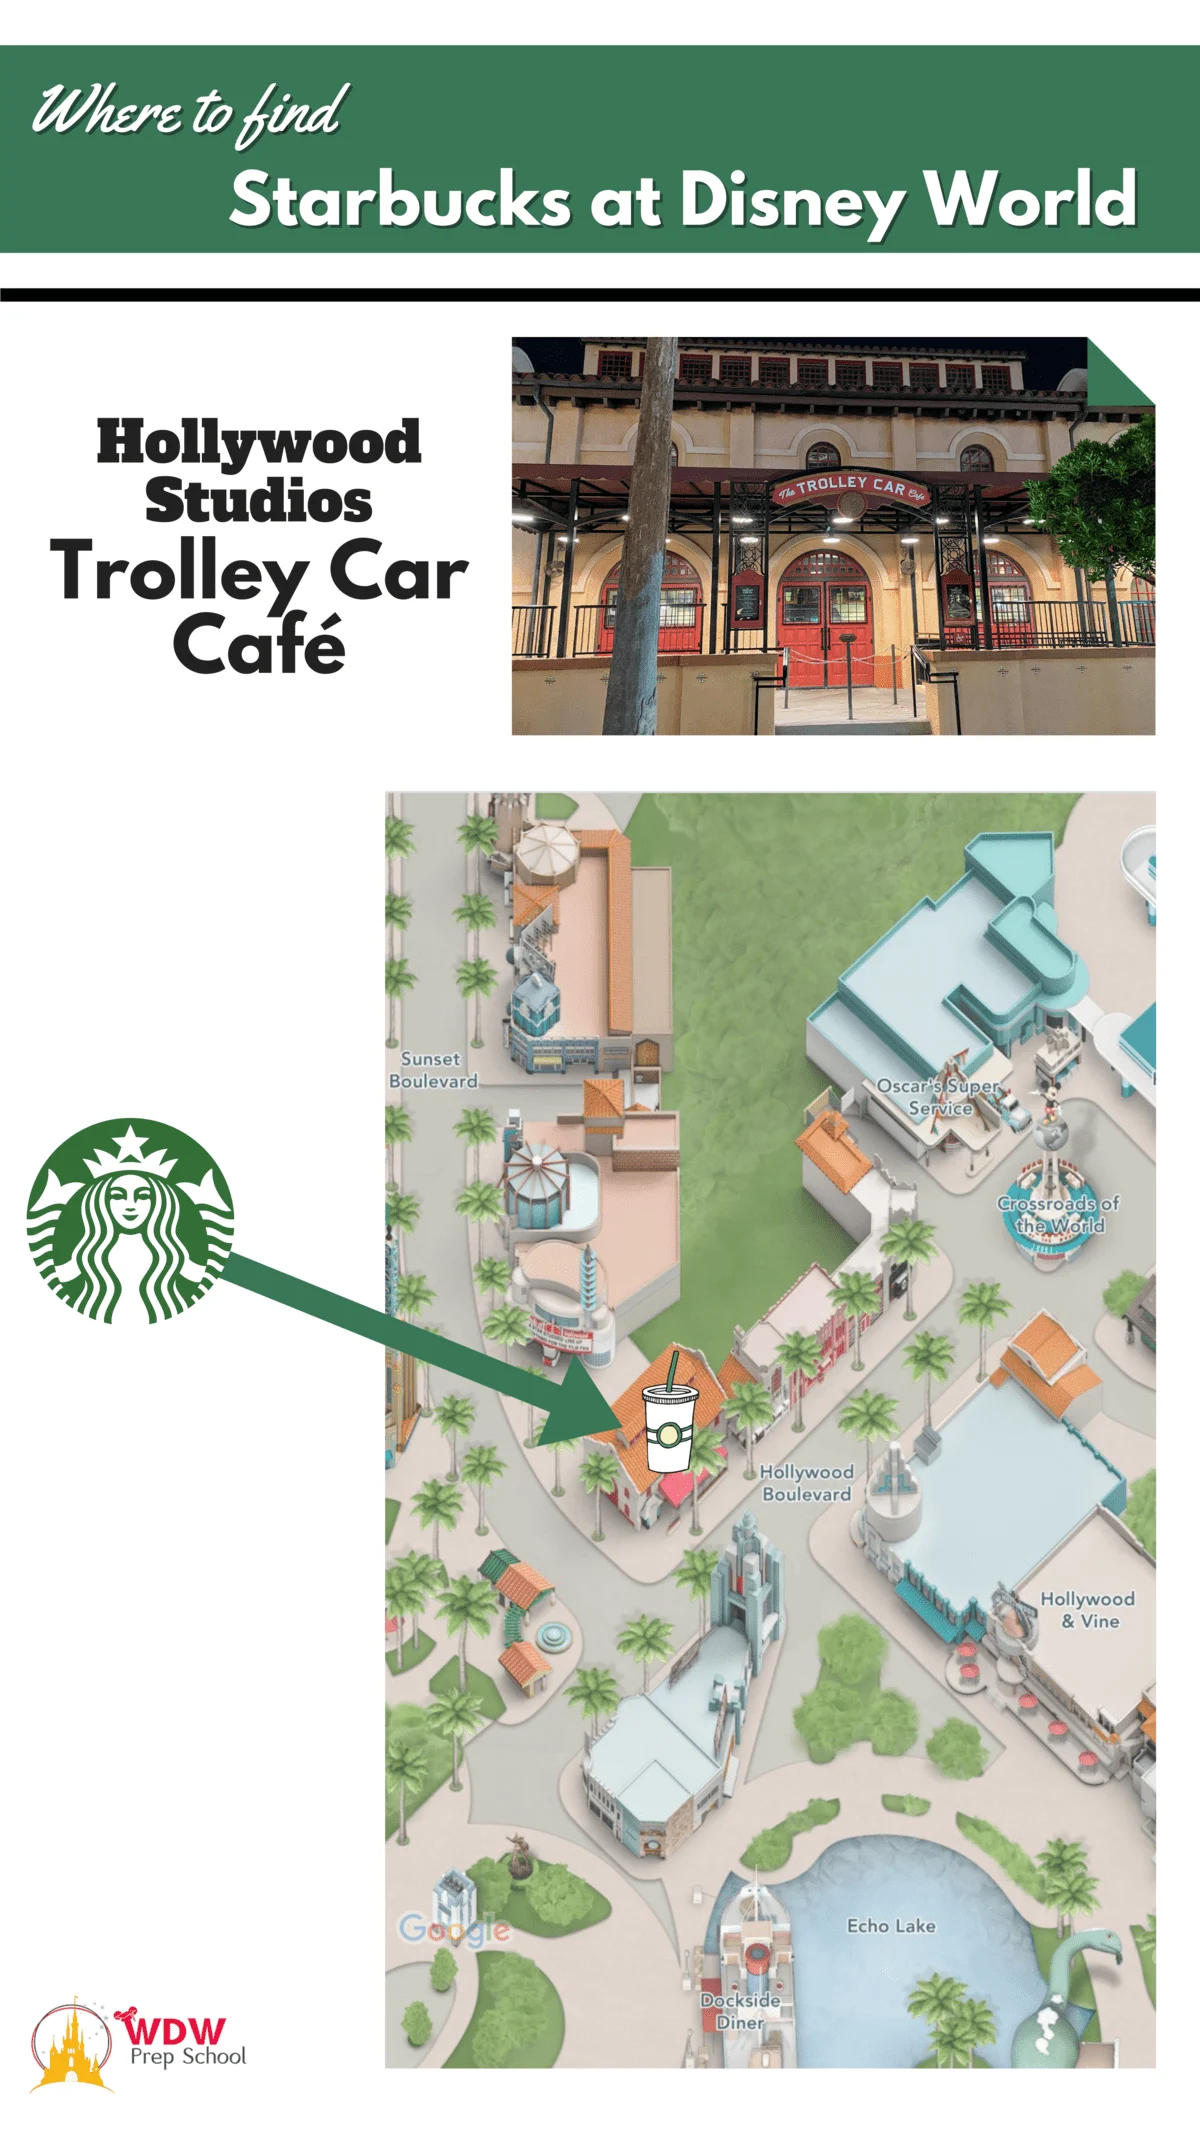 https://wdwprepschool.com/wp-content/uploads/starbucks-at-disney-world-here-everything-you-need-to-know-5.png.webp